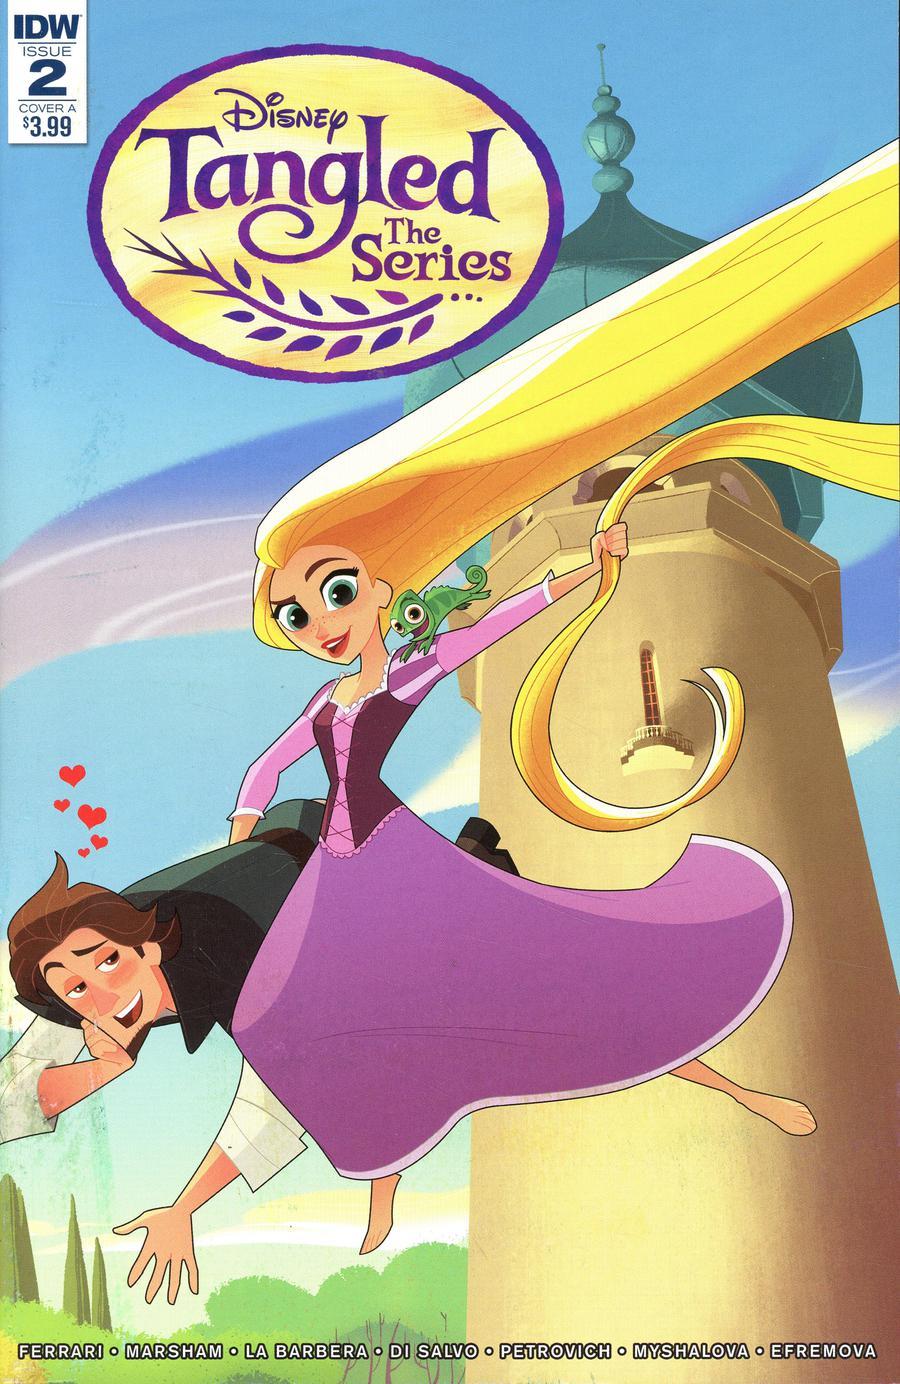 Tangled The Series Vol. 1 #2